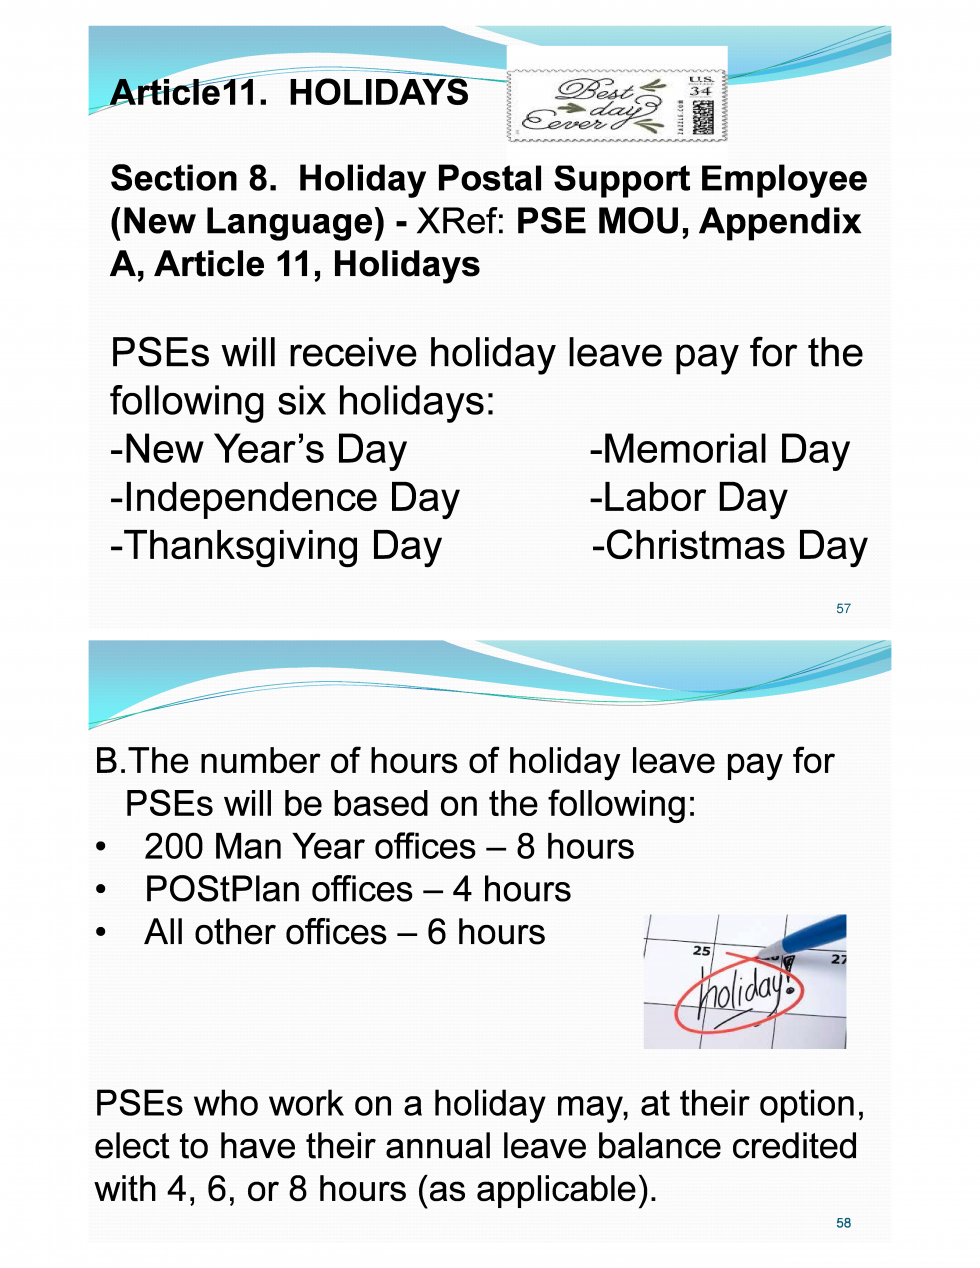 PSE Holiday Leave Pay for Labor Day 21st Century Postal Worker